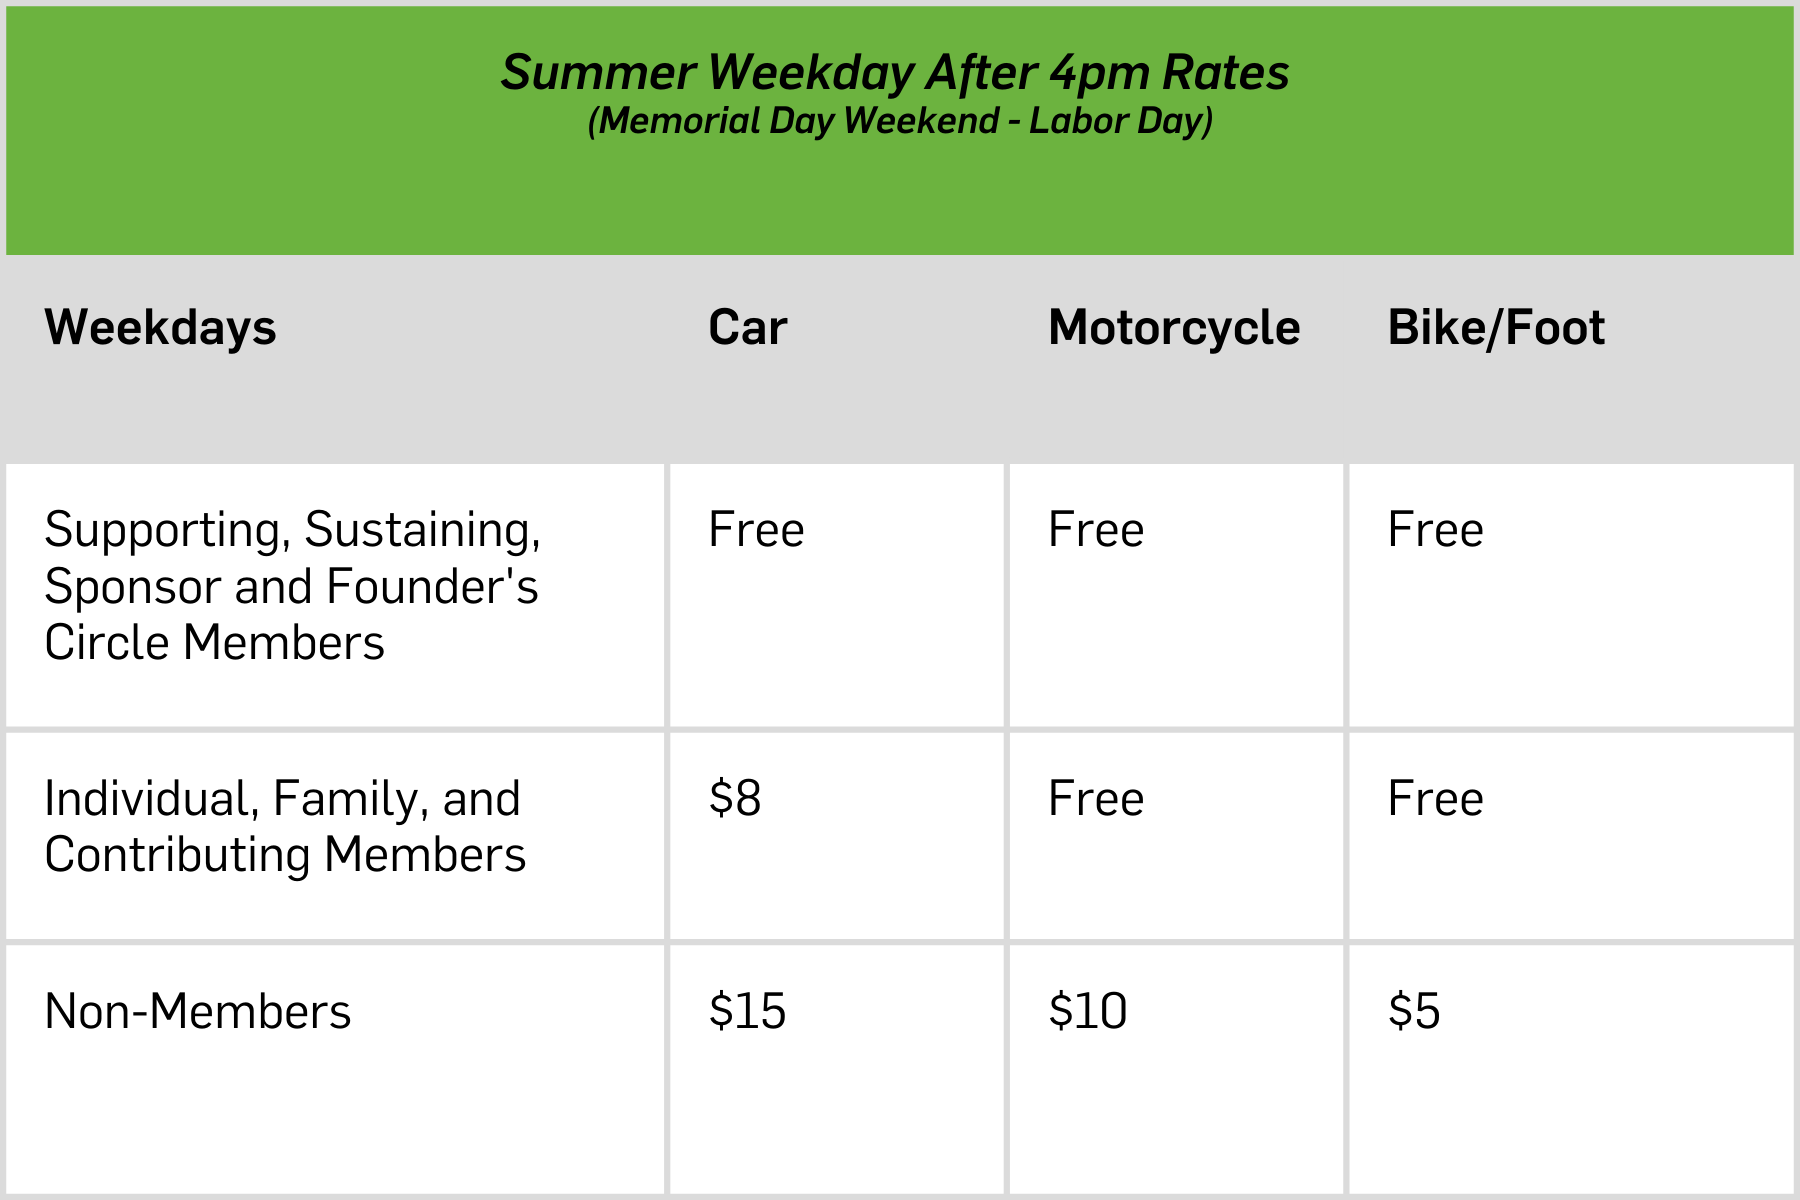 Image containing summer weekday rates for Crane Beach after 4pm (Memorial Day Weekend - Labor Day): Supporting, Sustaining, Sponsor, and Founder's Circle Members arriving by car: free, arriving by motorcycle: free, arriving by bike/foot: free Individual, Family and Contributing Members arriving by car: $8, arriving by motorcycle: free, arriving by bike/foot: free Nonmembers arriving by car: $15, arriving by motorcycle: $10, arriving by bike/foot: $5